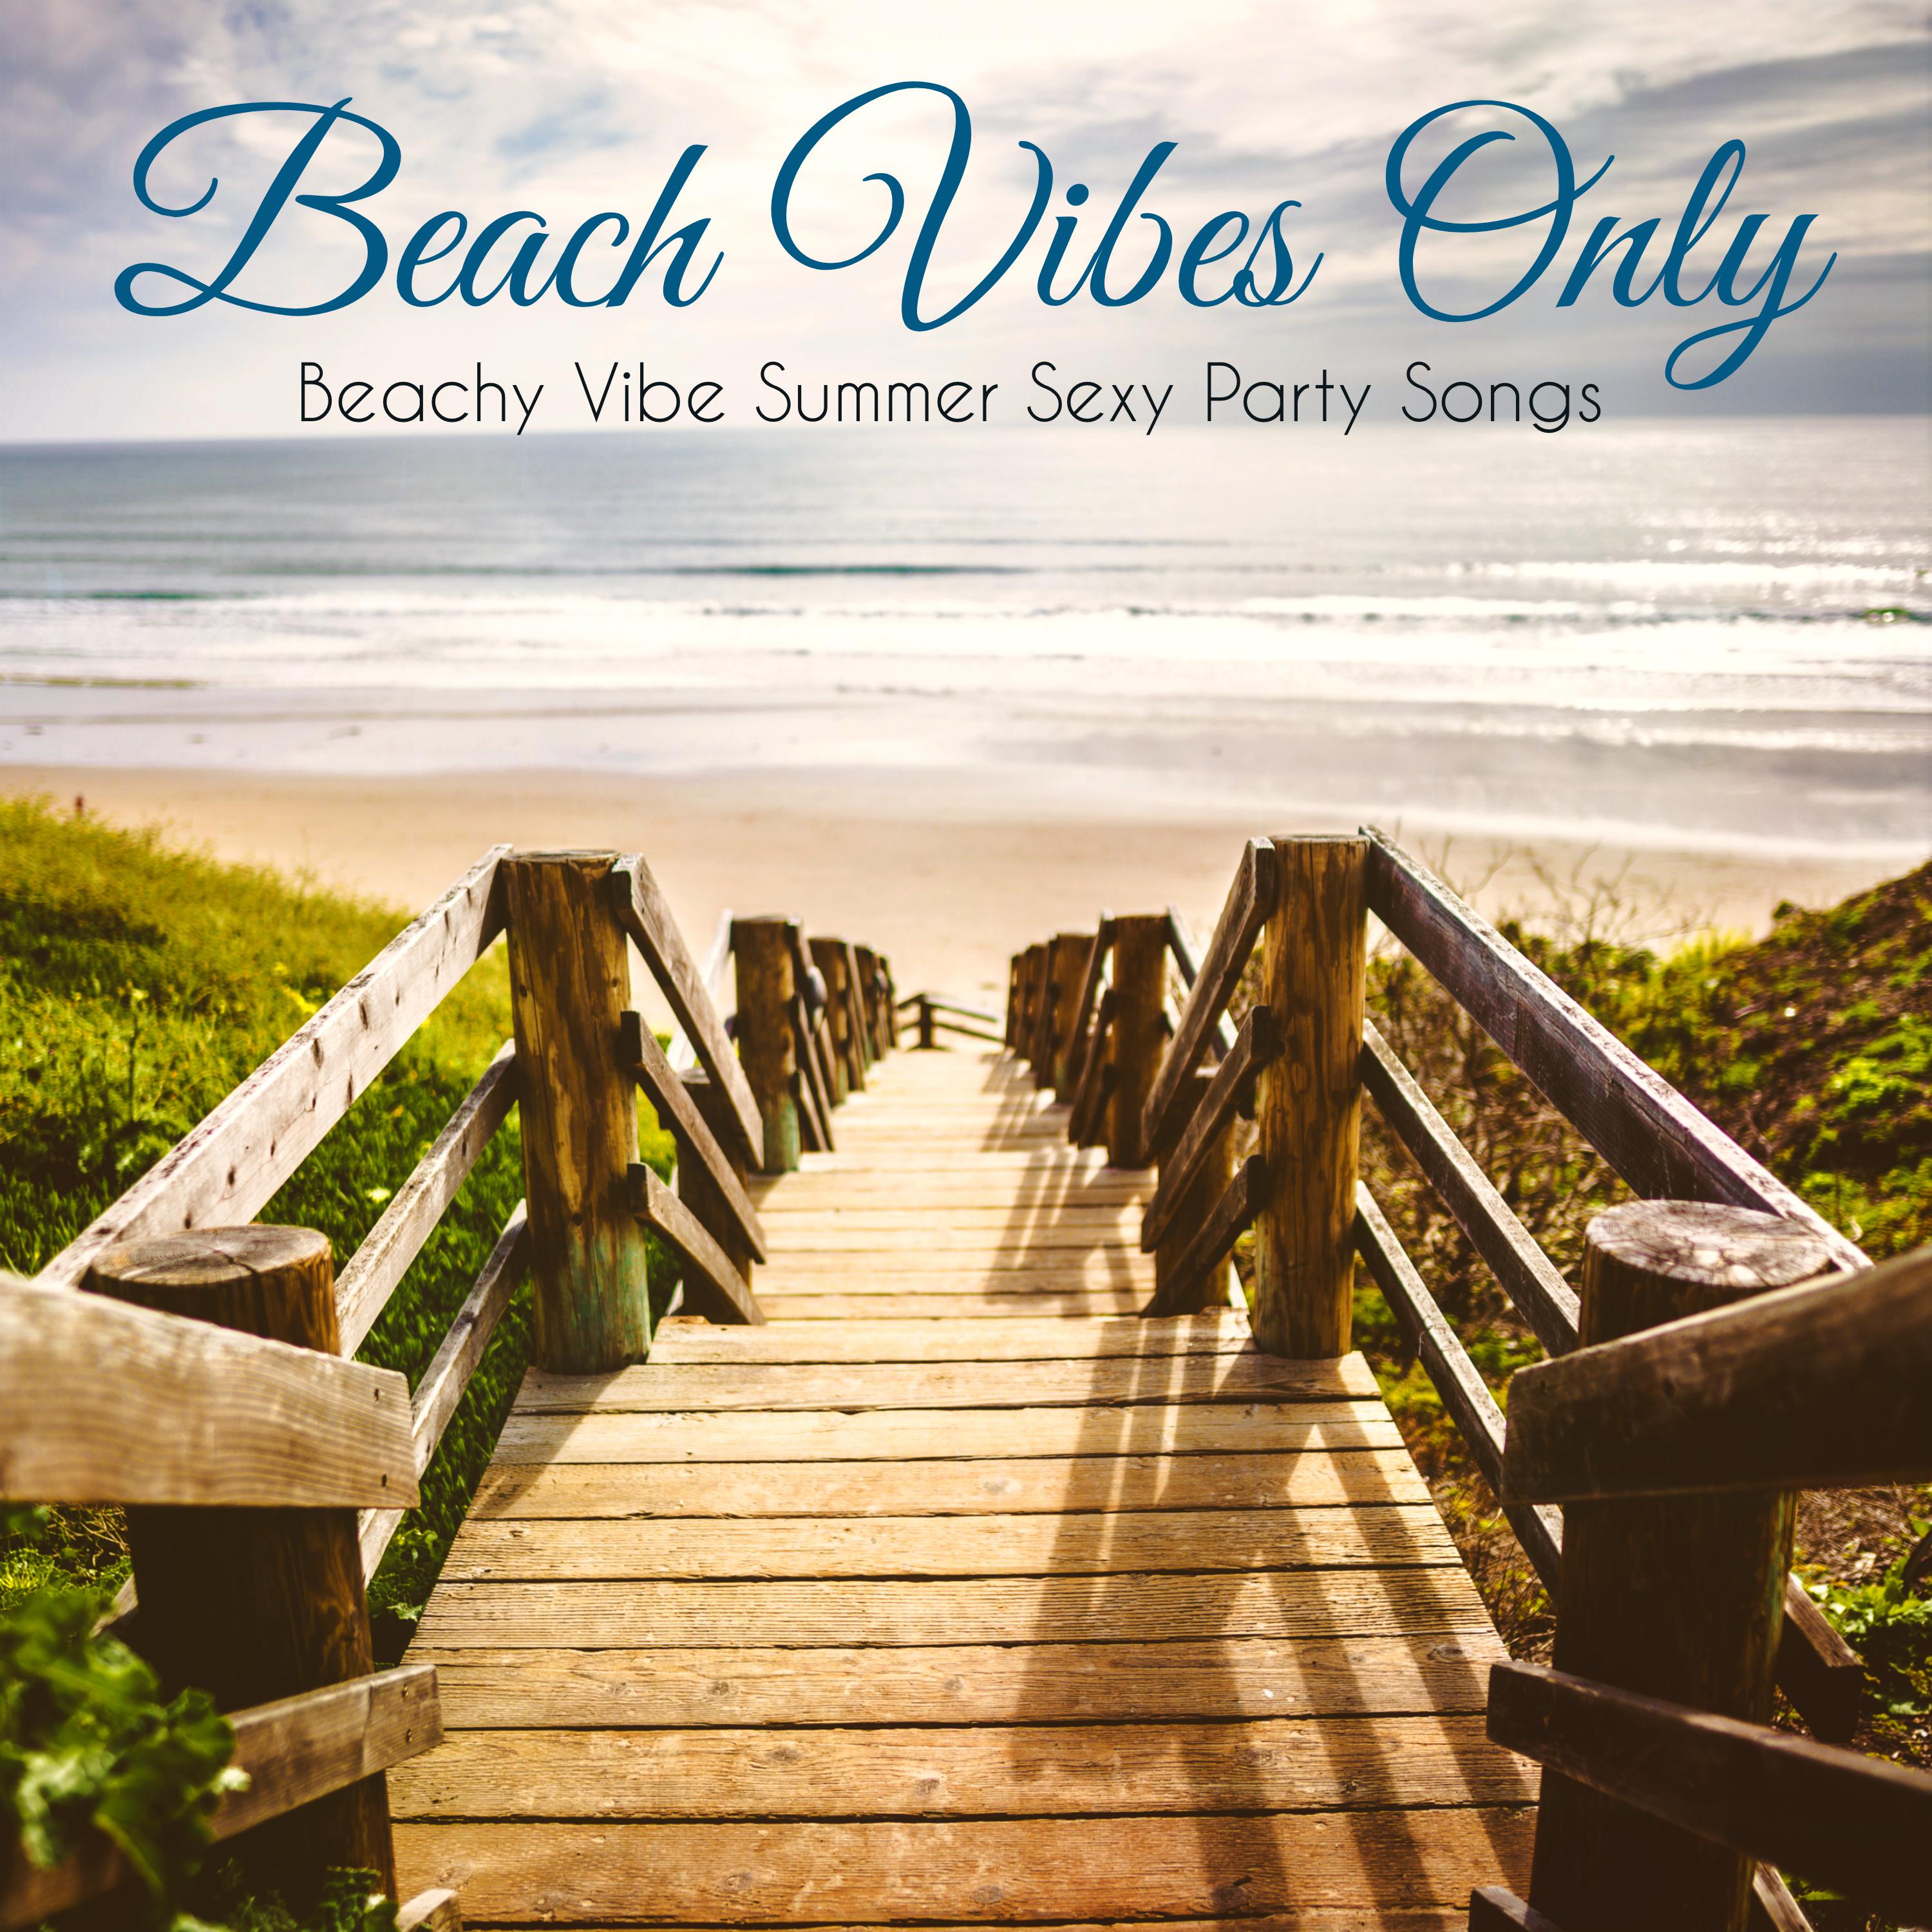 Beach Vibes Only  Beachy Vibe Summer  Party Songs